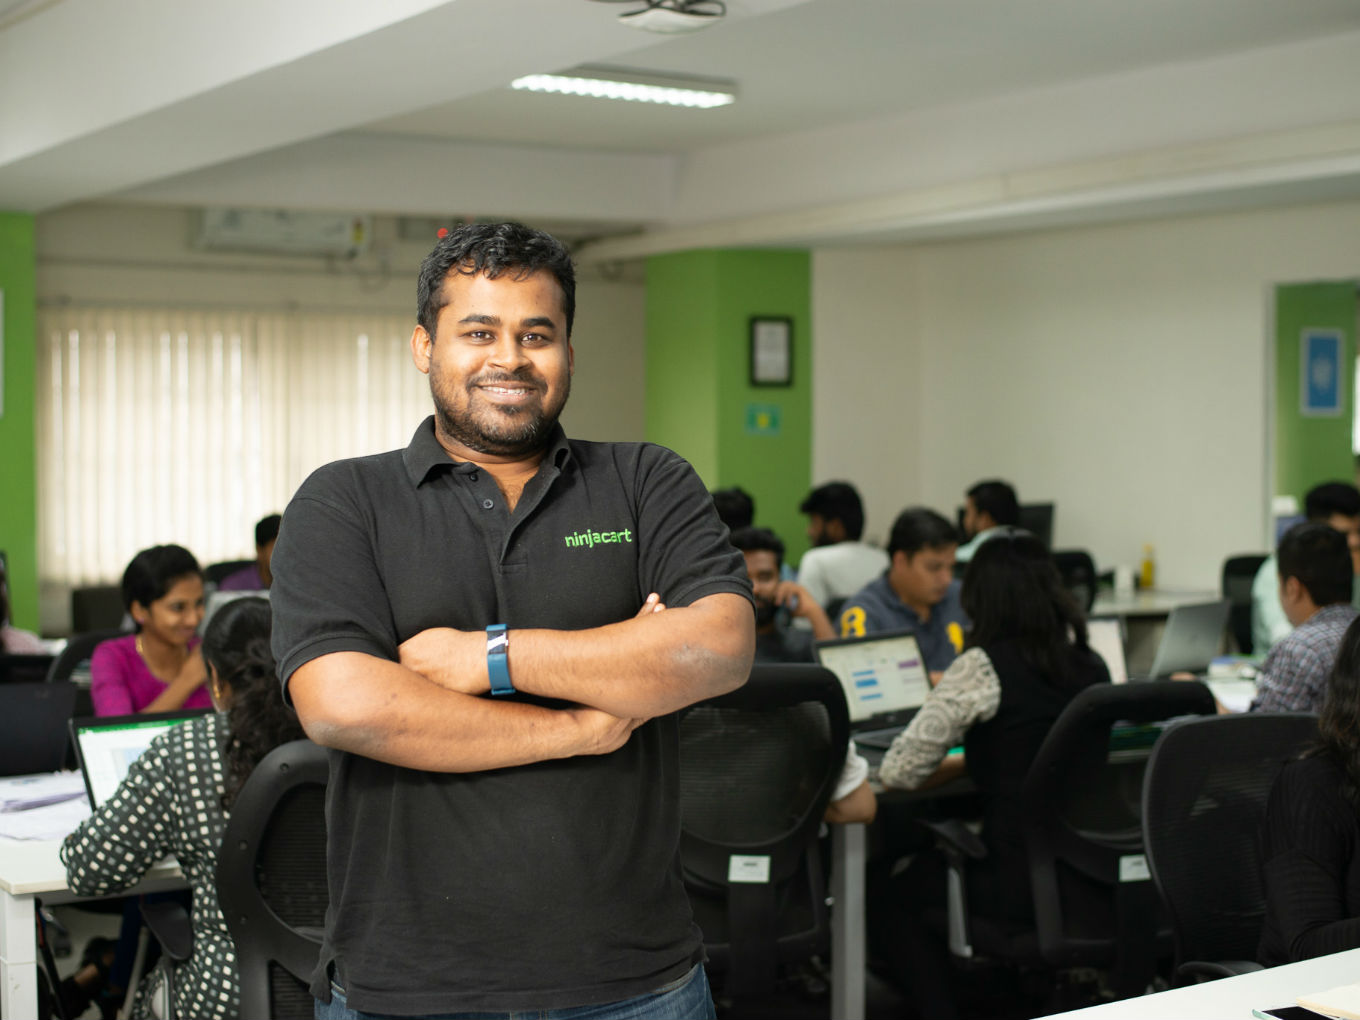 Ninjacart Raises $34.6 Mn In Series B Funding Round To Fuel Its Expansion Plans